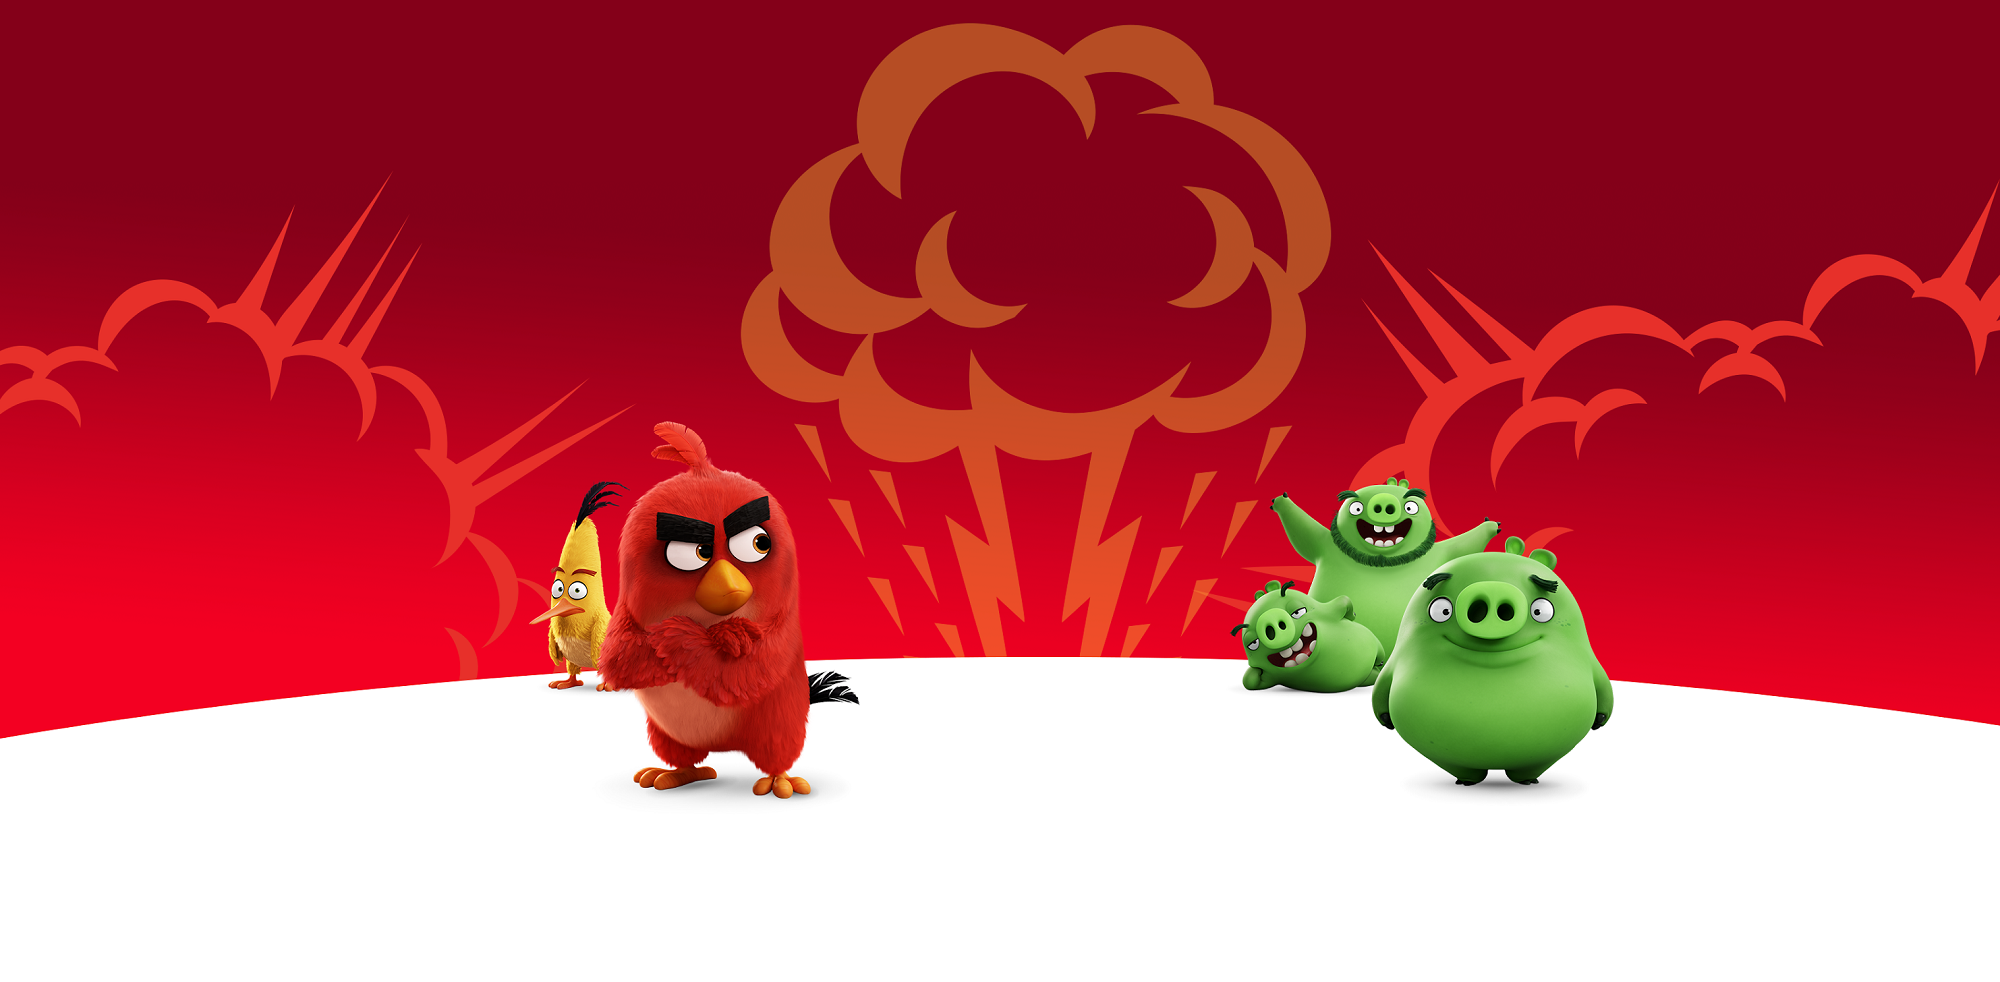 Playtika's deal to acquire Rovio has come to an end